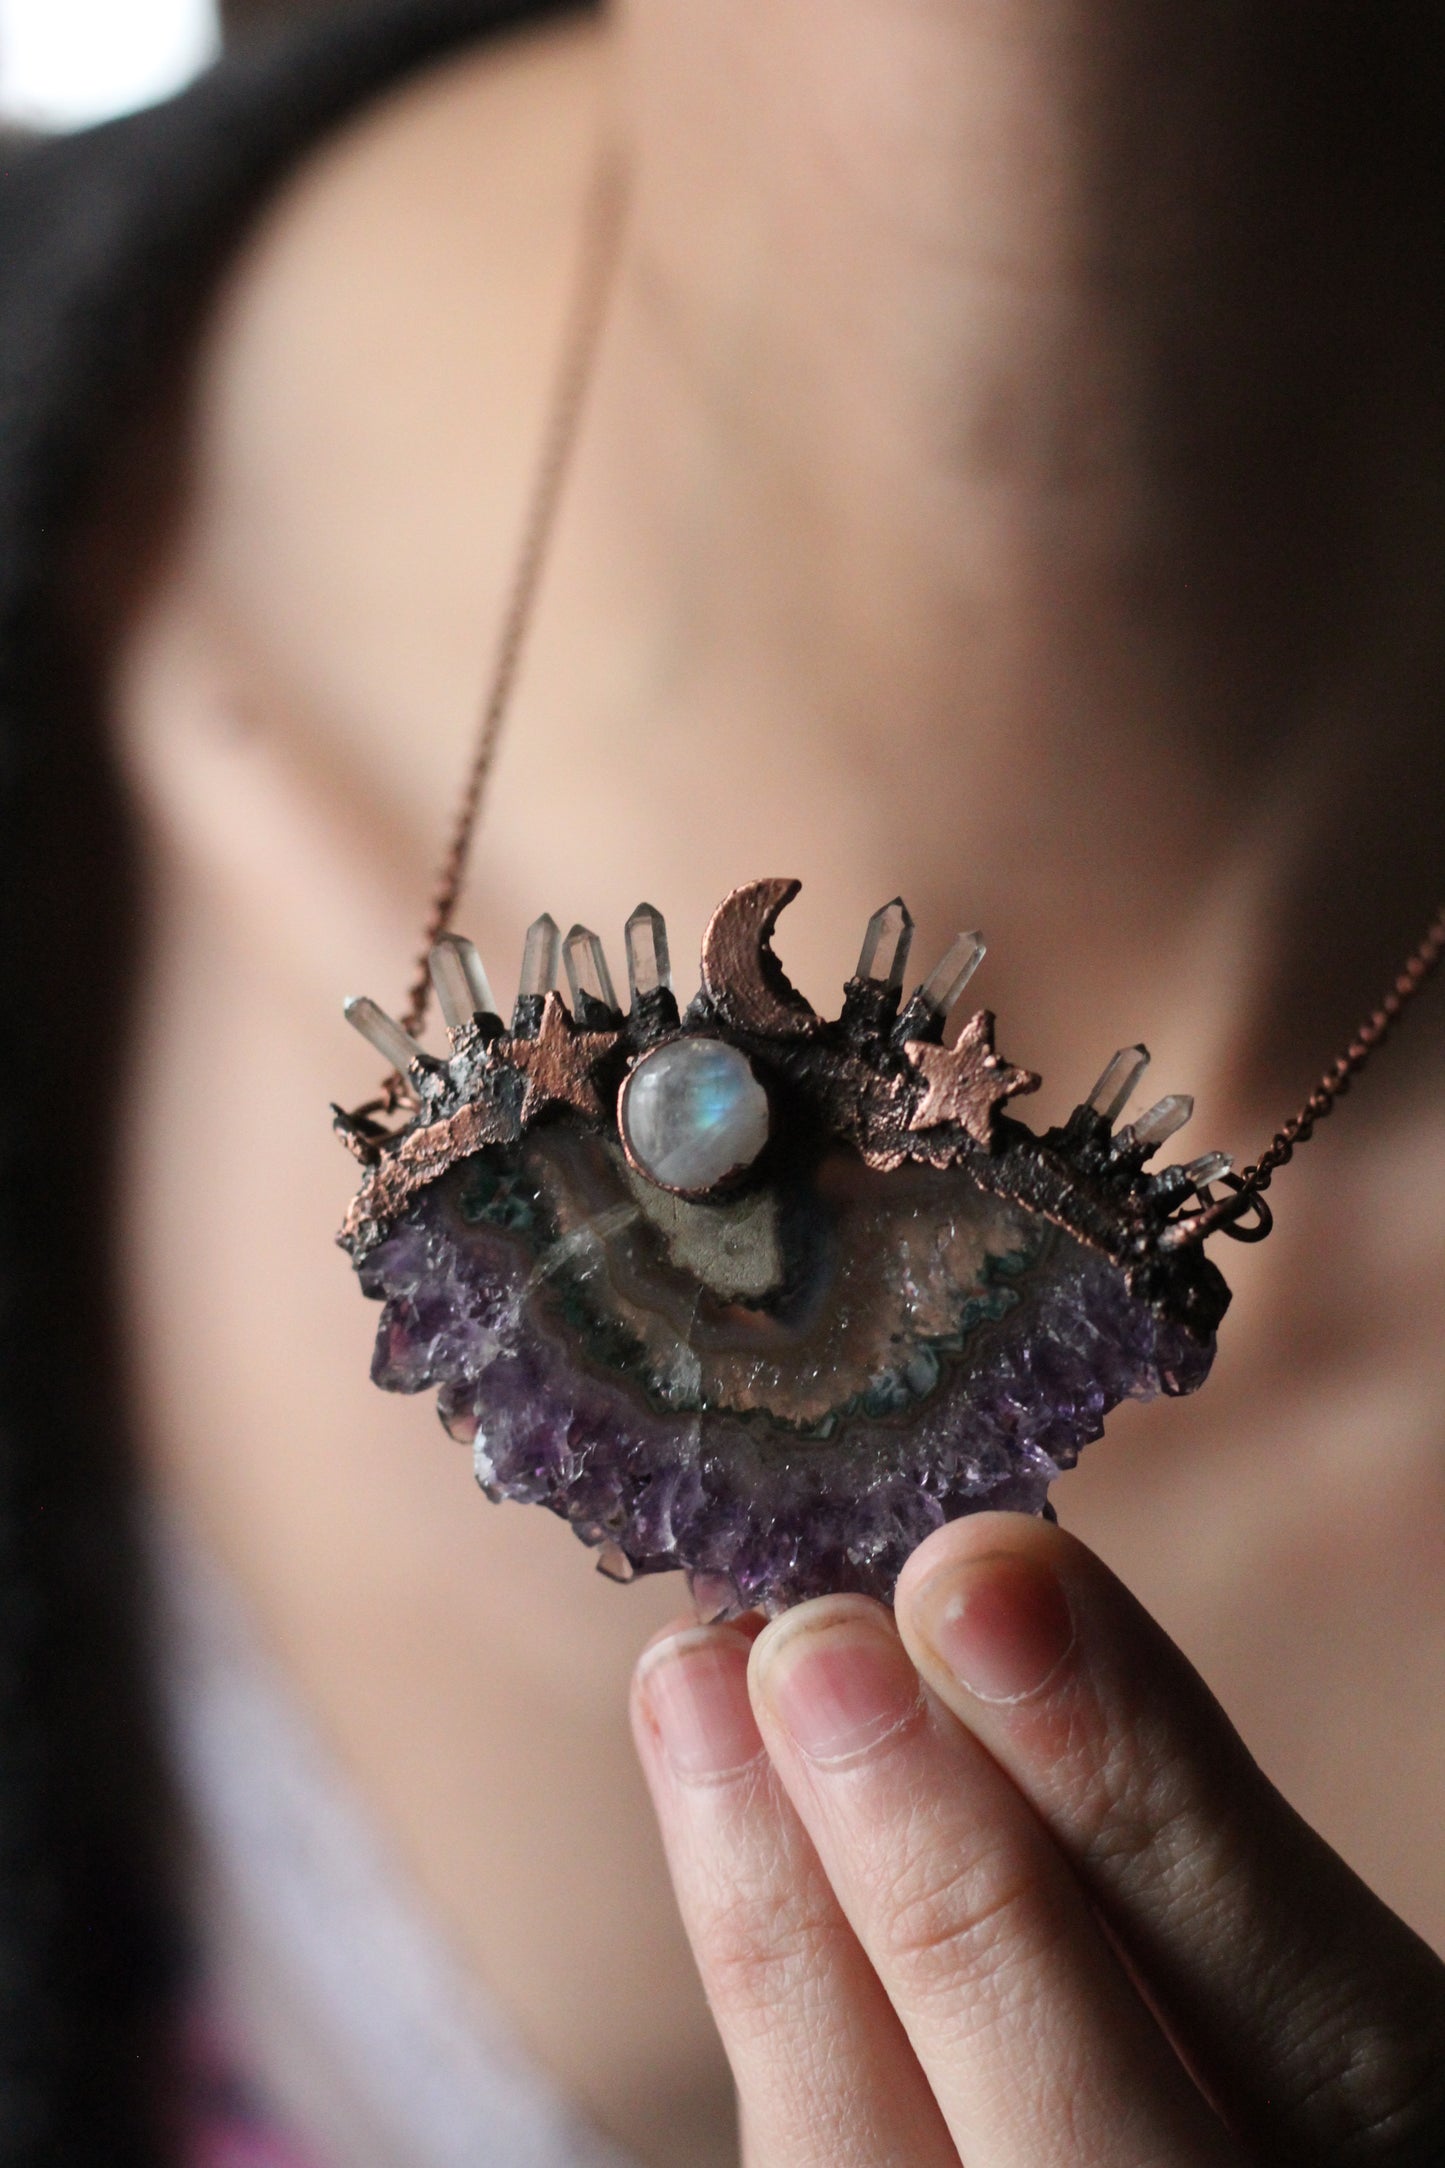 Fragments: Amethyst Slice Stardust Copper Pendant with Moonstone